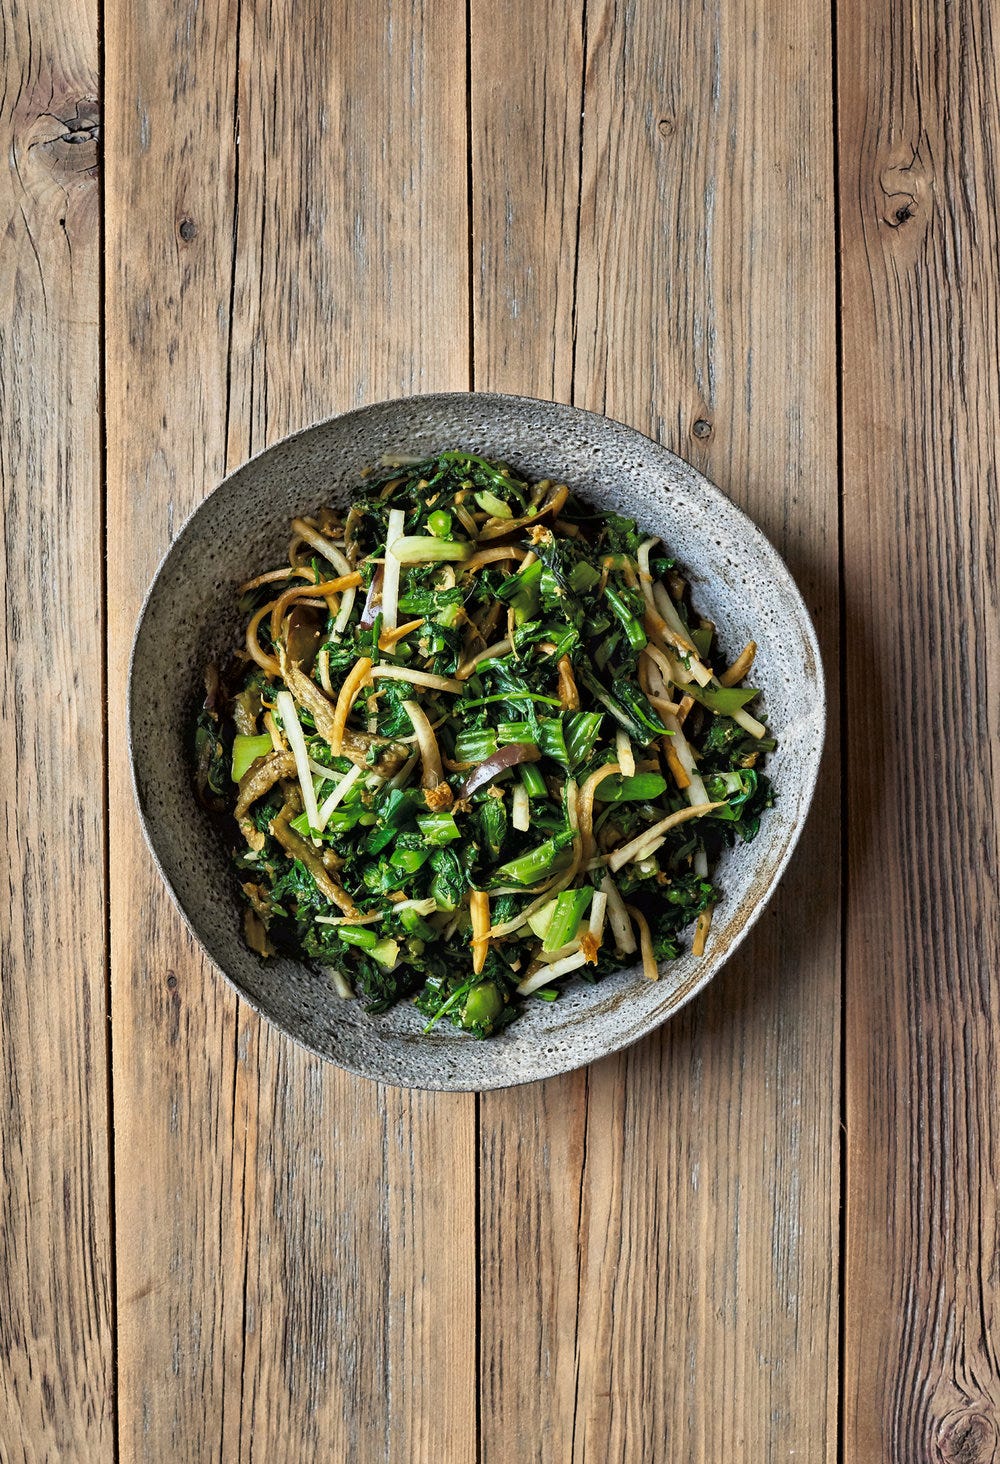 Ginger-Infused Greens and Vegetables